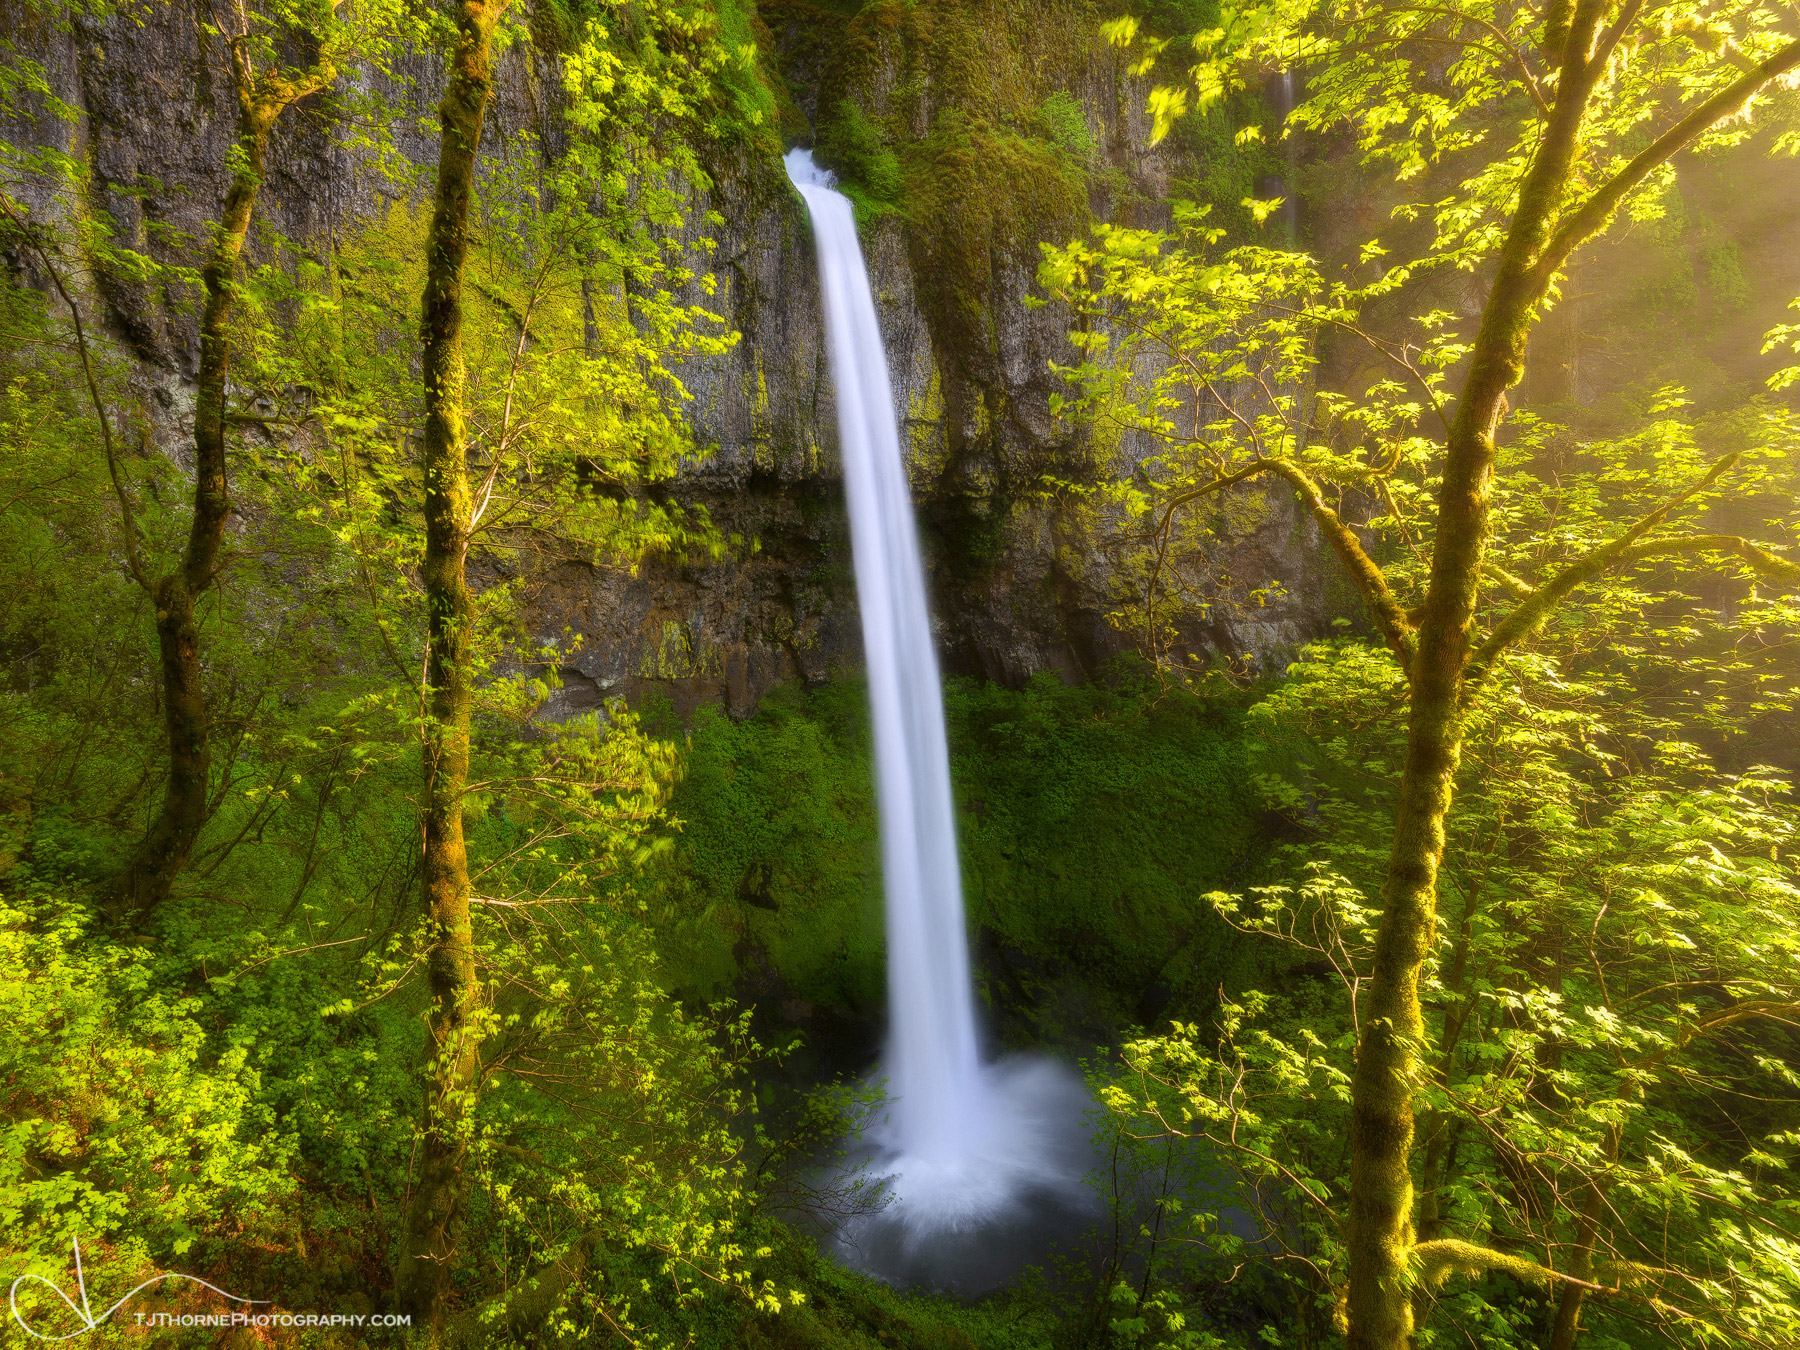 Golden light falls across the scene at Elowah Falls in the Columbia River Gorge, Oregon. I dedicate this photo to the camera...